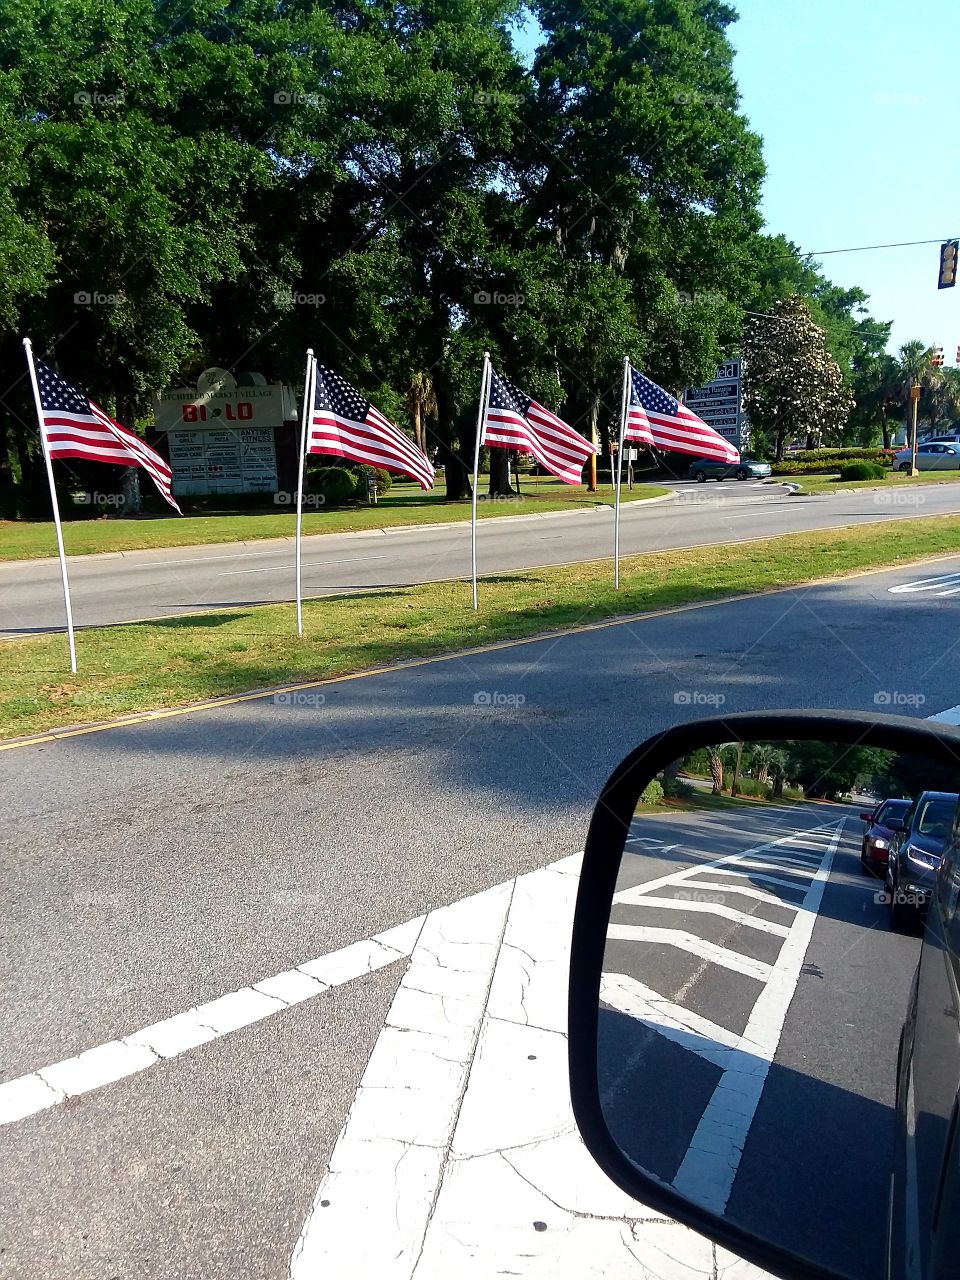 Pawleys Island puts these all the through town on ocean highway getting ready for Memorial Weekend in honor of our fallen heroes